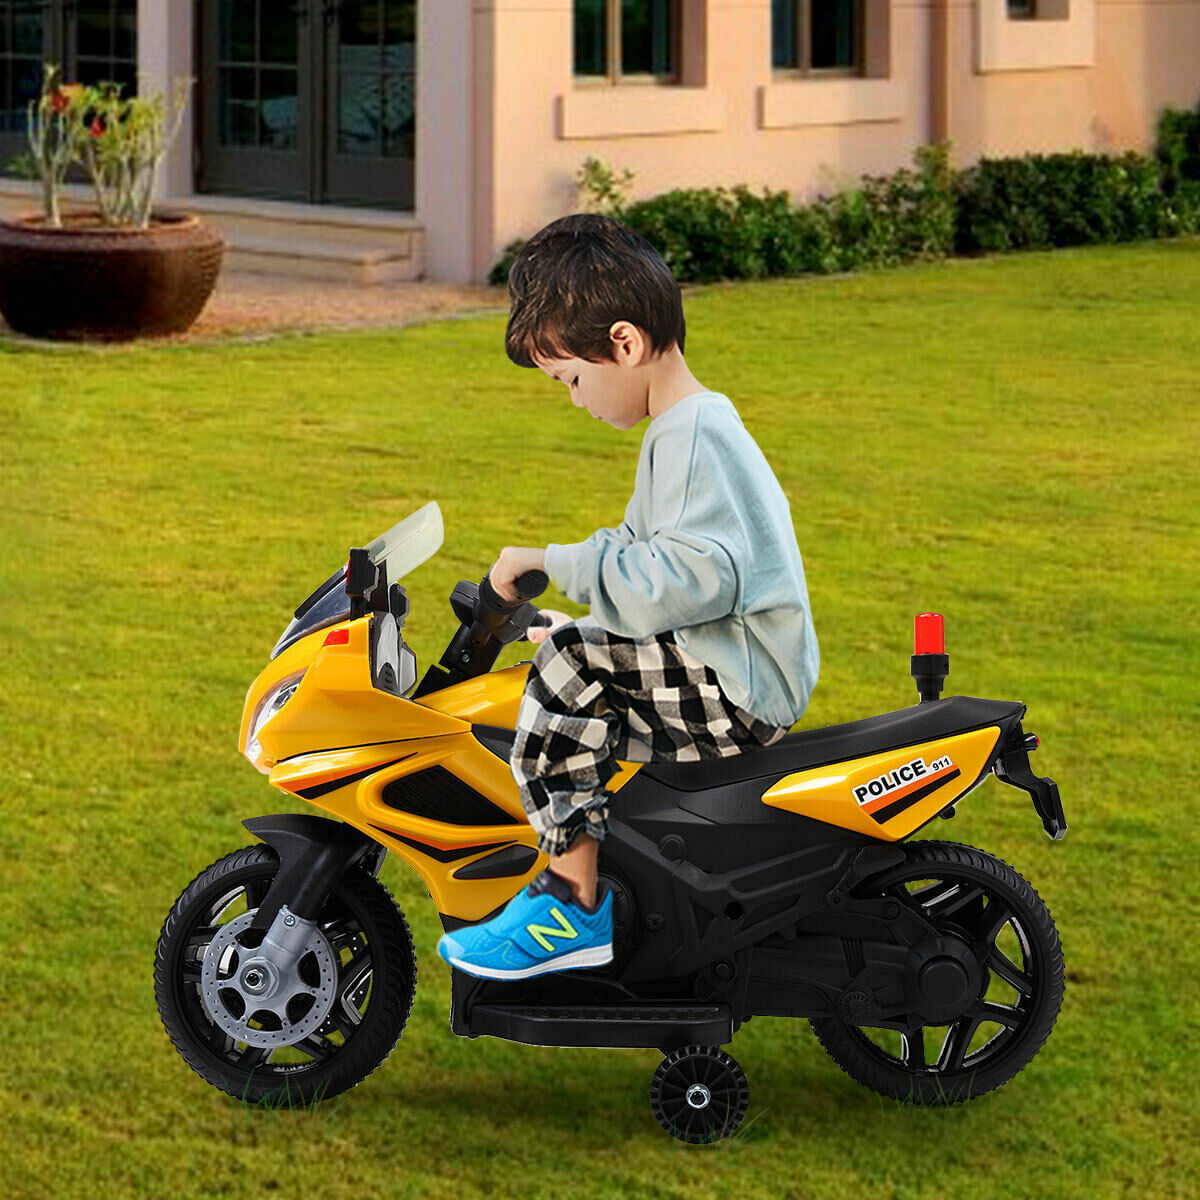 Lowestbest Kids Electric Motorcycle, Kids Ride on Motorcycle, Red 6V Battery Powered 4 Wheels